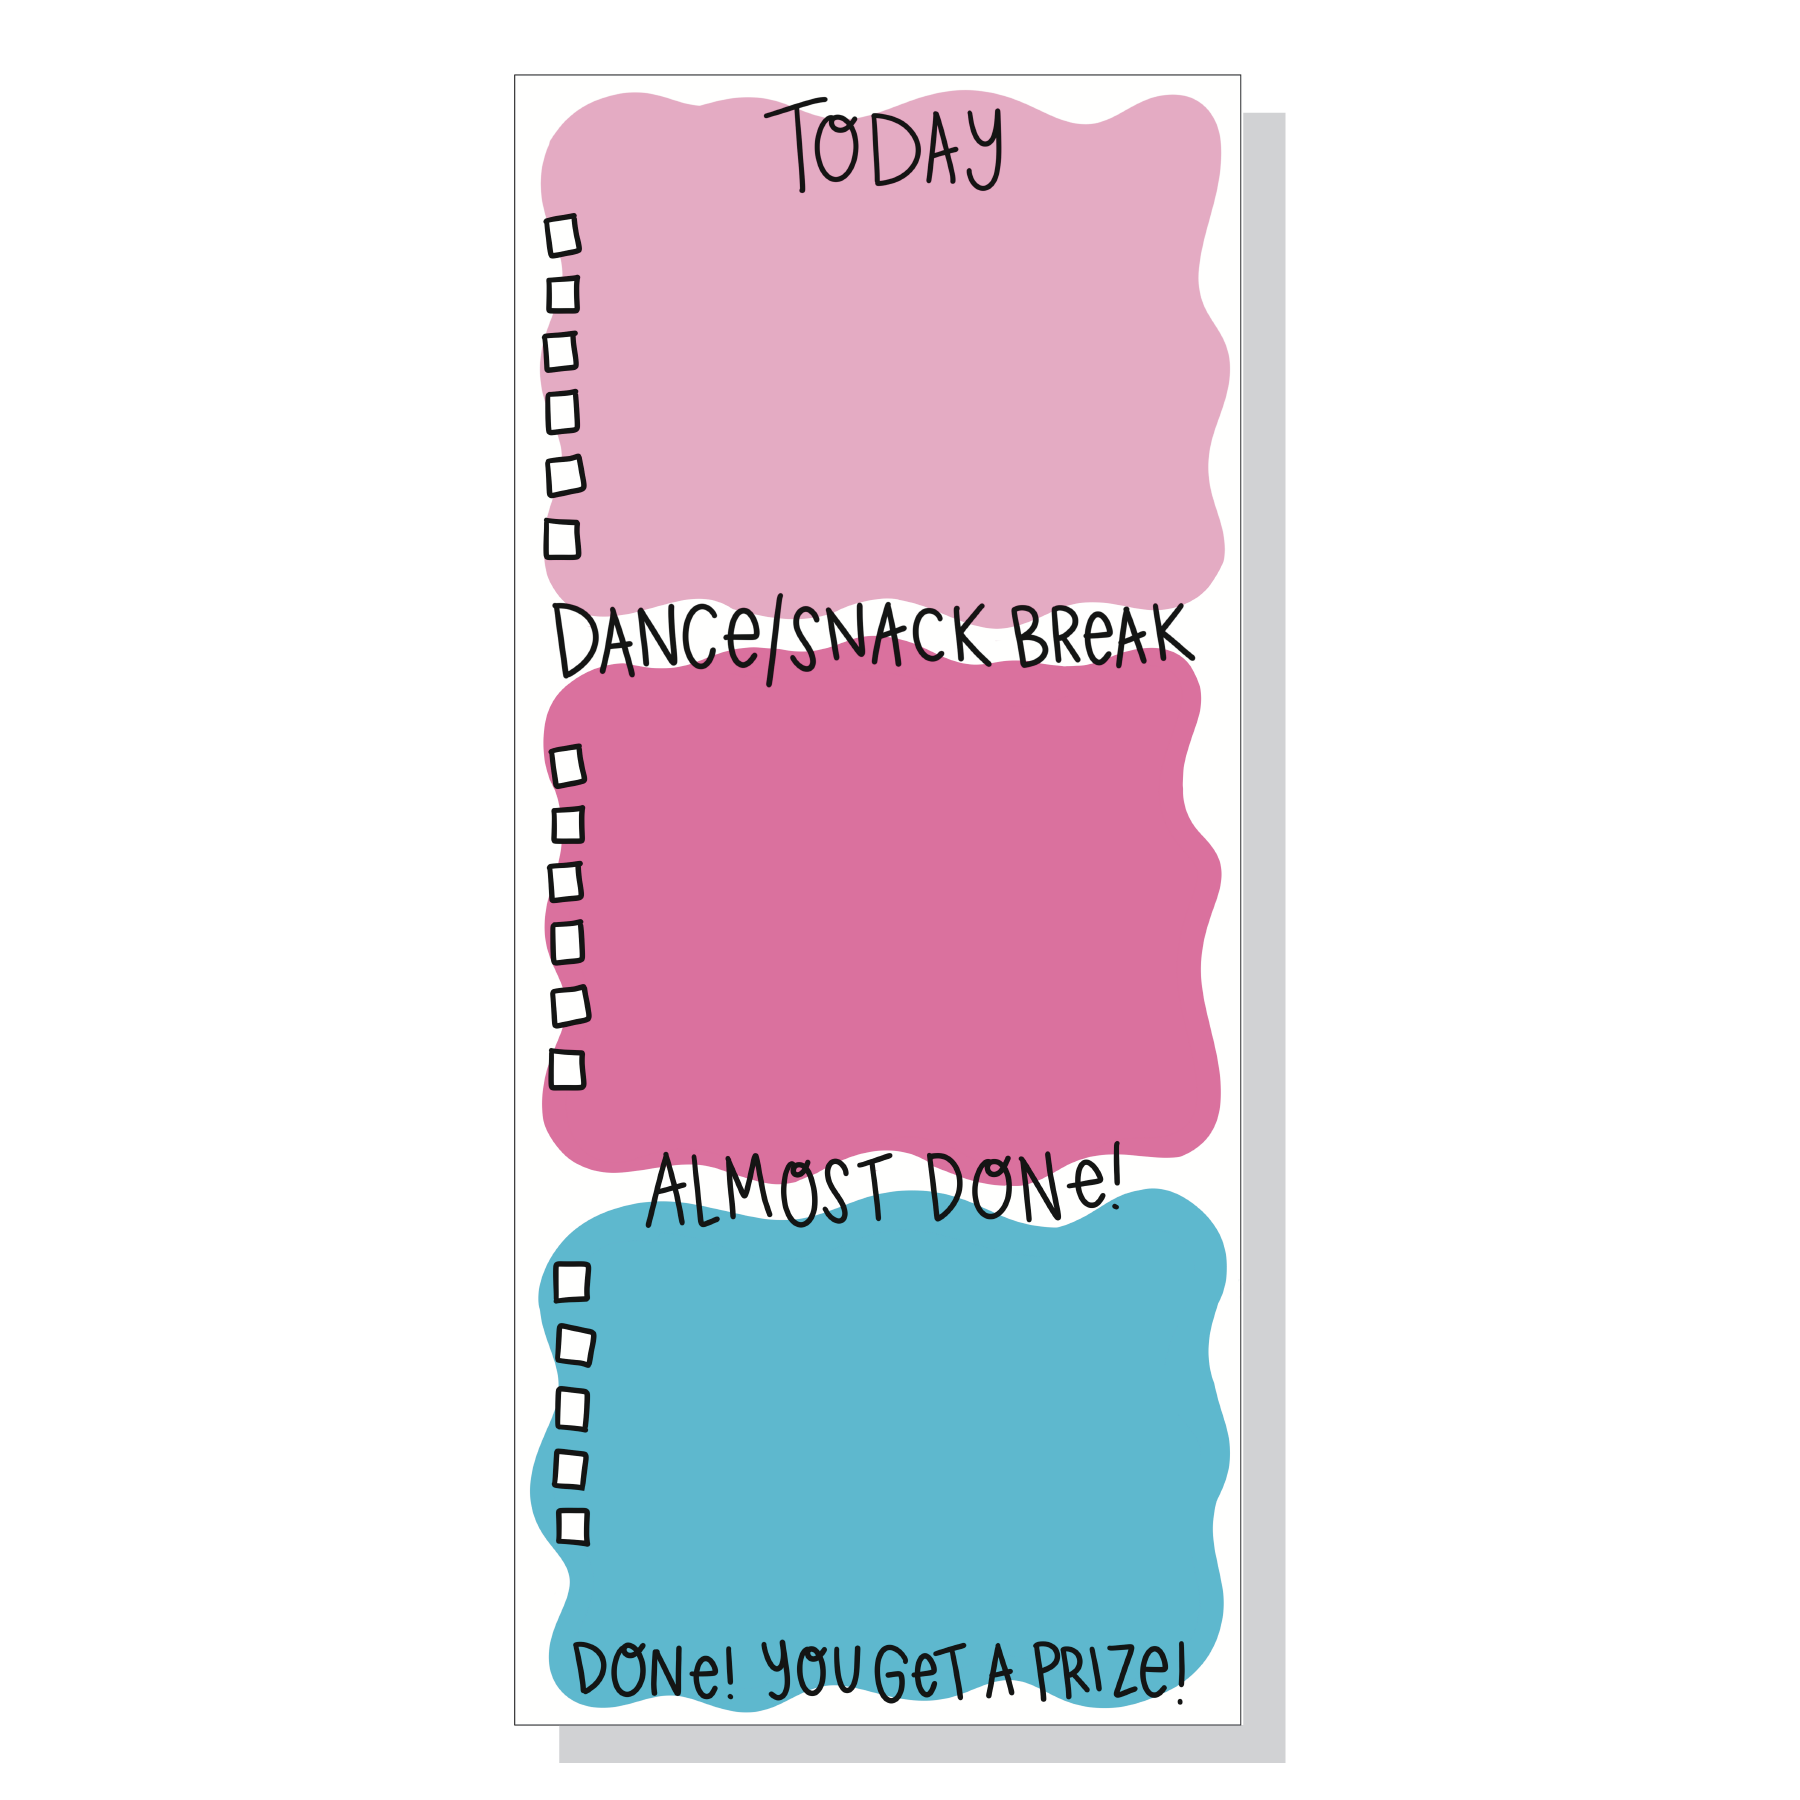 Image of notepad with white background and three wavy edged boxes in pink, bright pink and teal with black text says, "Today", "Dance/Snack break", "almost done!" and "Done! You get a prize!" with checkboxes. 